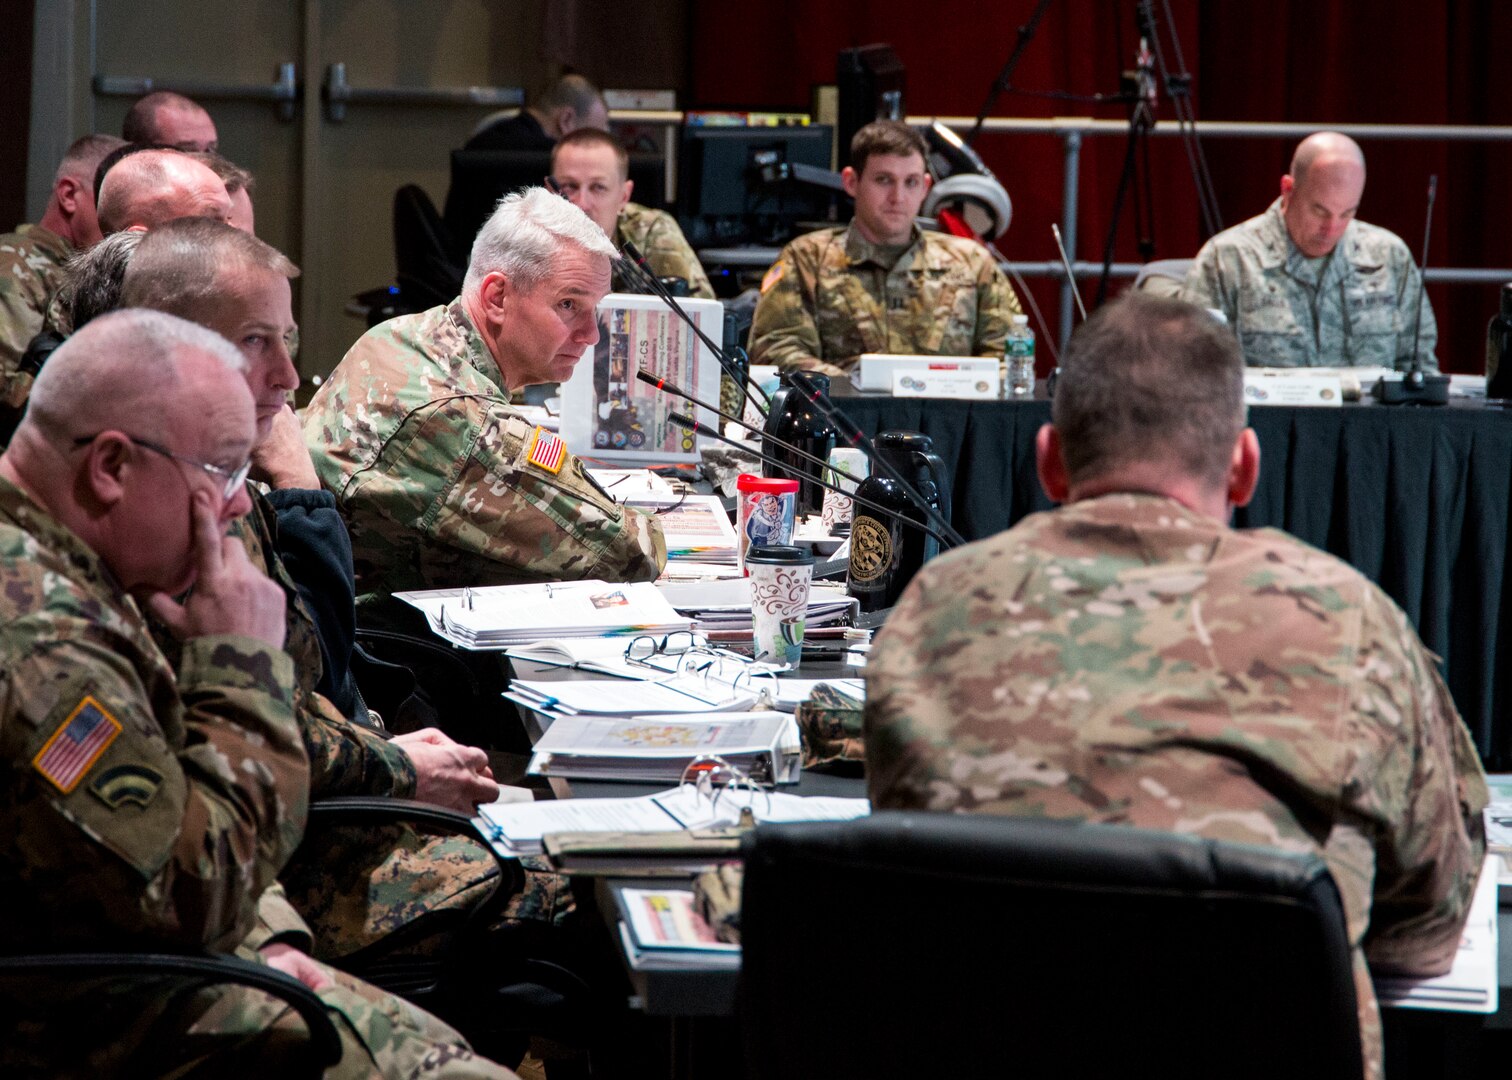 FORT EUSTIS, Va. -- U.S. Army Maj. Gen. Richard Gallant responds to remarks during the 2018 Defense Chemical, Biological, Radiological and Nuclear Response (DCRF) Commanders Conference at the Jacob's Conference Center at Fort Langley Eustis, Va. The three-day conference allowed Joint Task Force Civil Support (JTF-CS) and DCRF leadership to review how thousands of military service members would respond to a catastrophic disaster in the U.S, whether manmade or natural.  JTF-CS provides command and control for designated Department of Defense specialized response forces to assist local, state, federal and tribal partners in saving lives, preventing further injury, and providing critical support to enable community recovery.